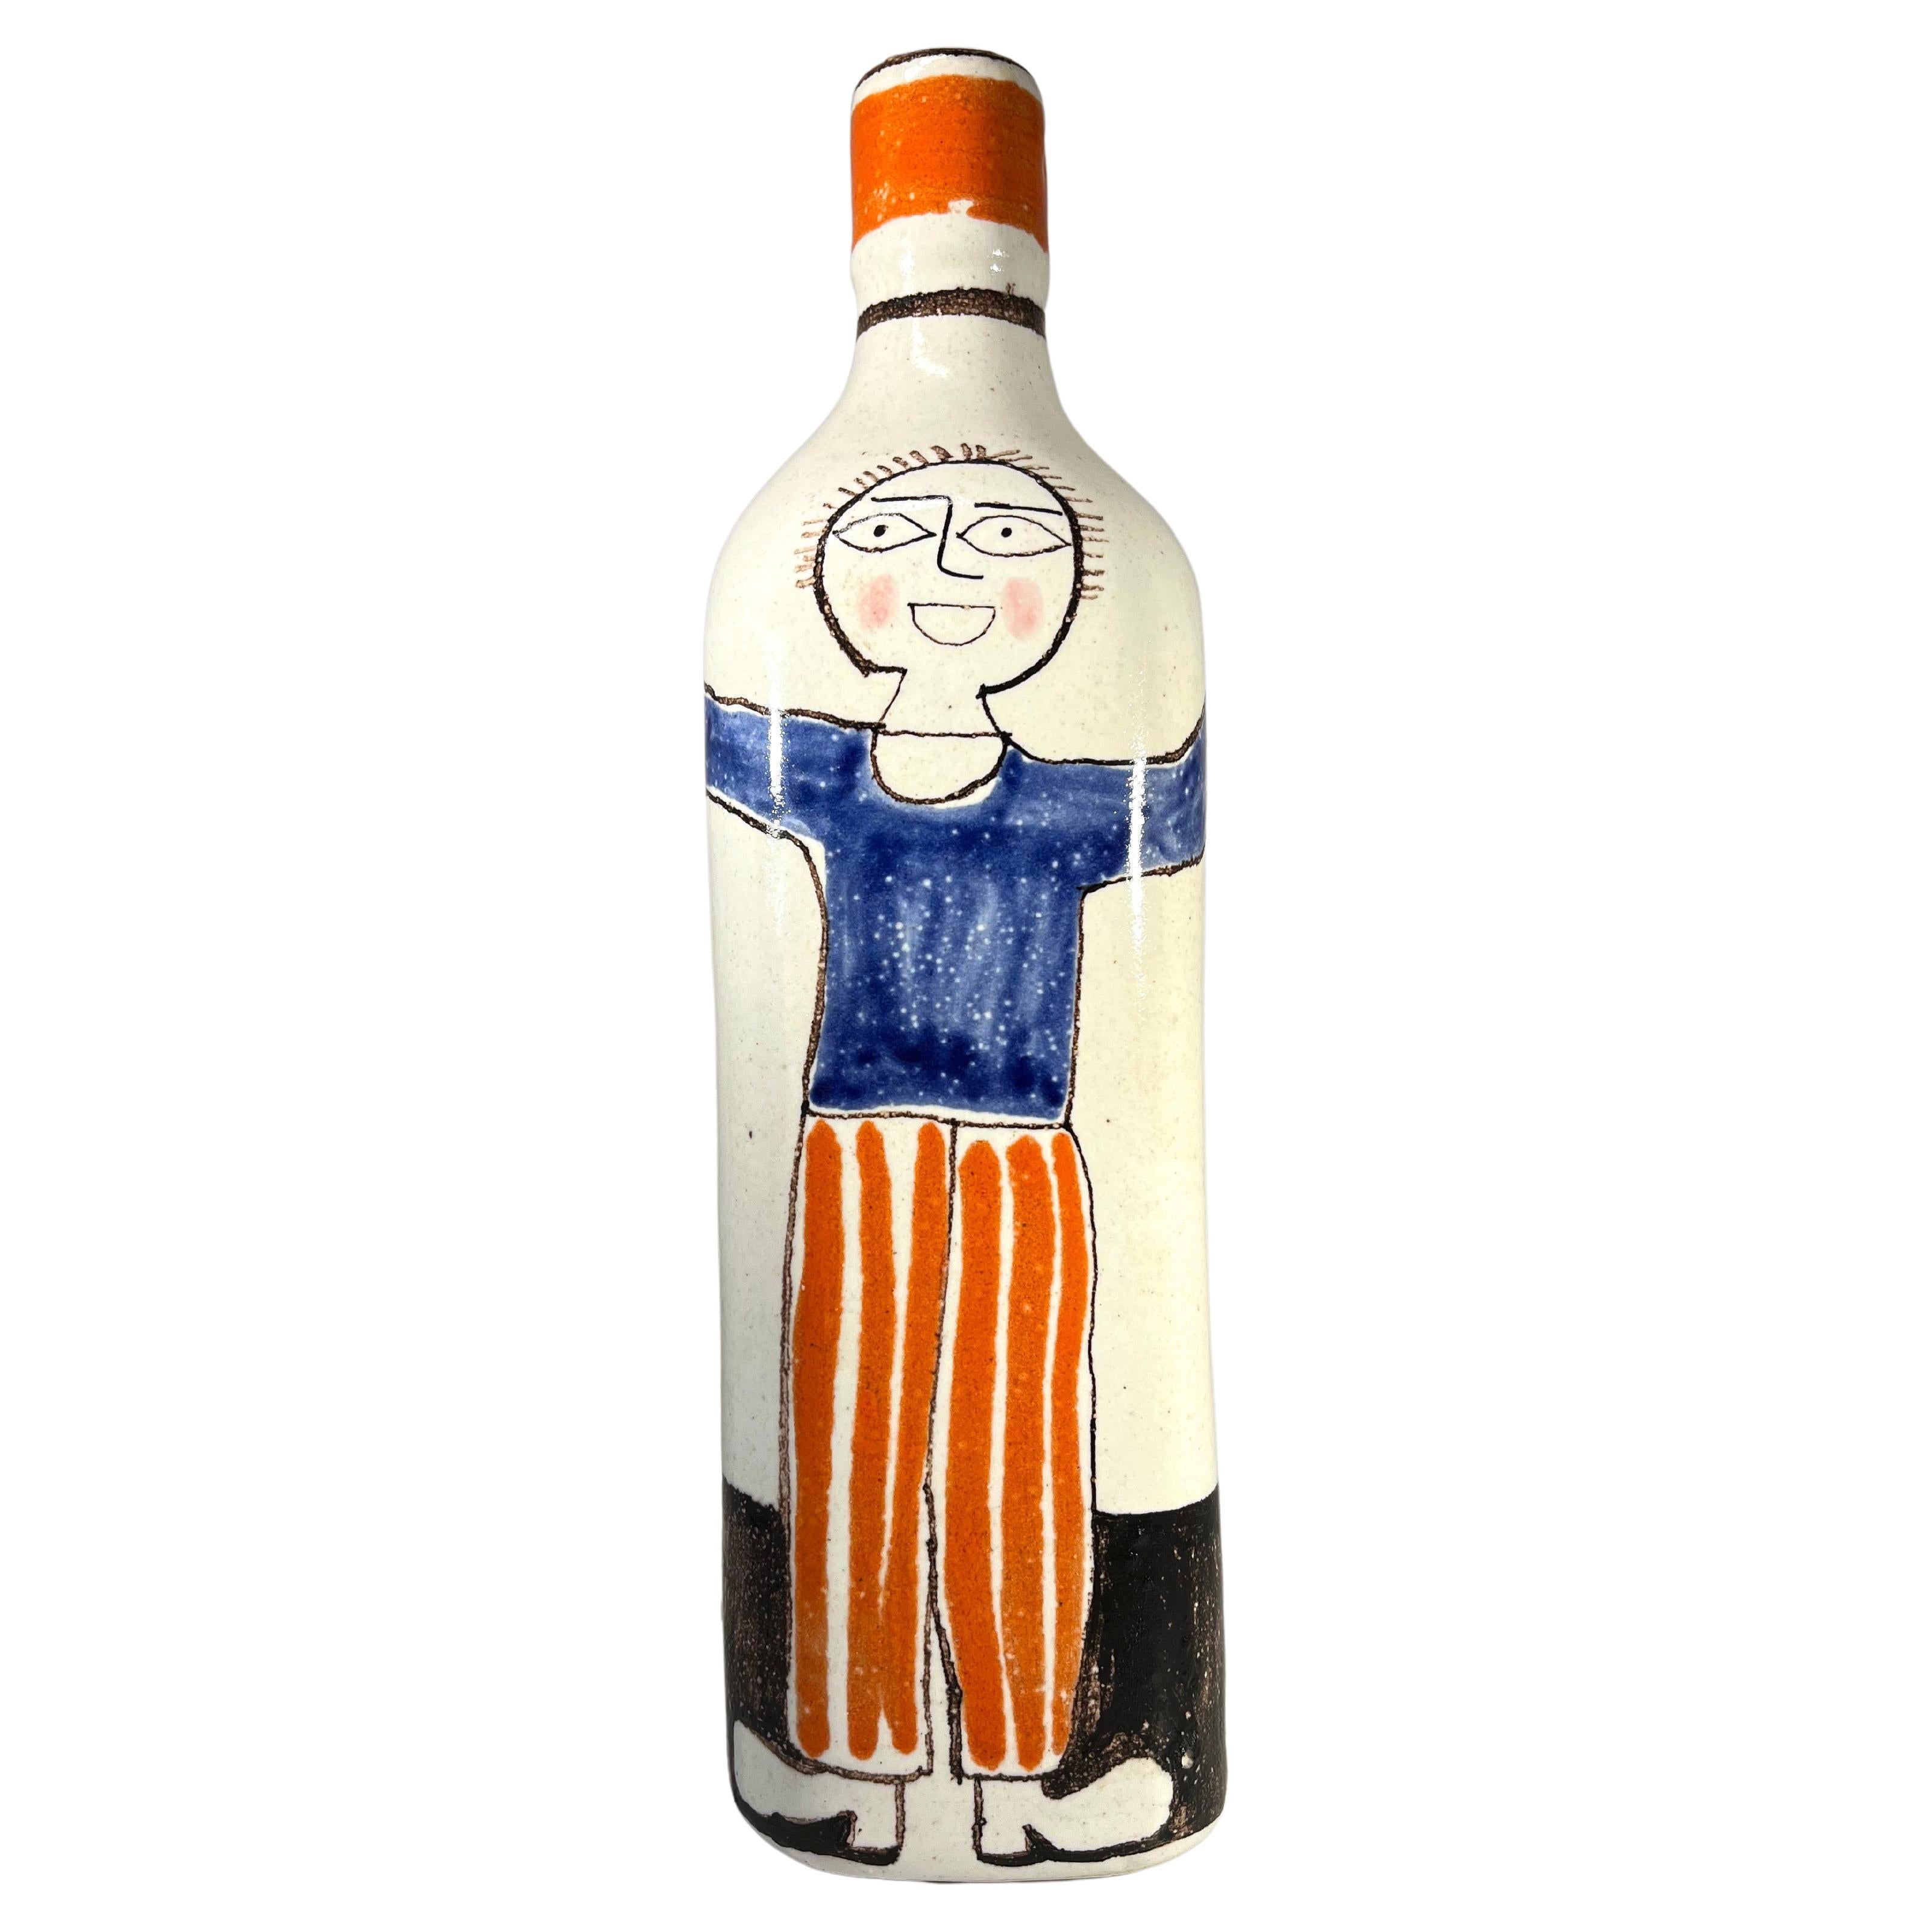 DeSimone 'Arms Outstretched' Hand Painted Italian Ceramic Bottle Vase c1960's For Sale